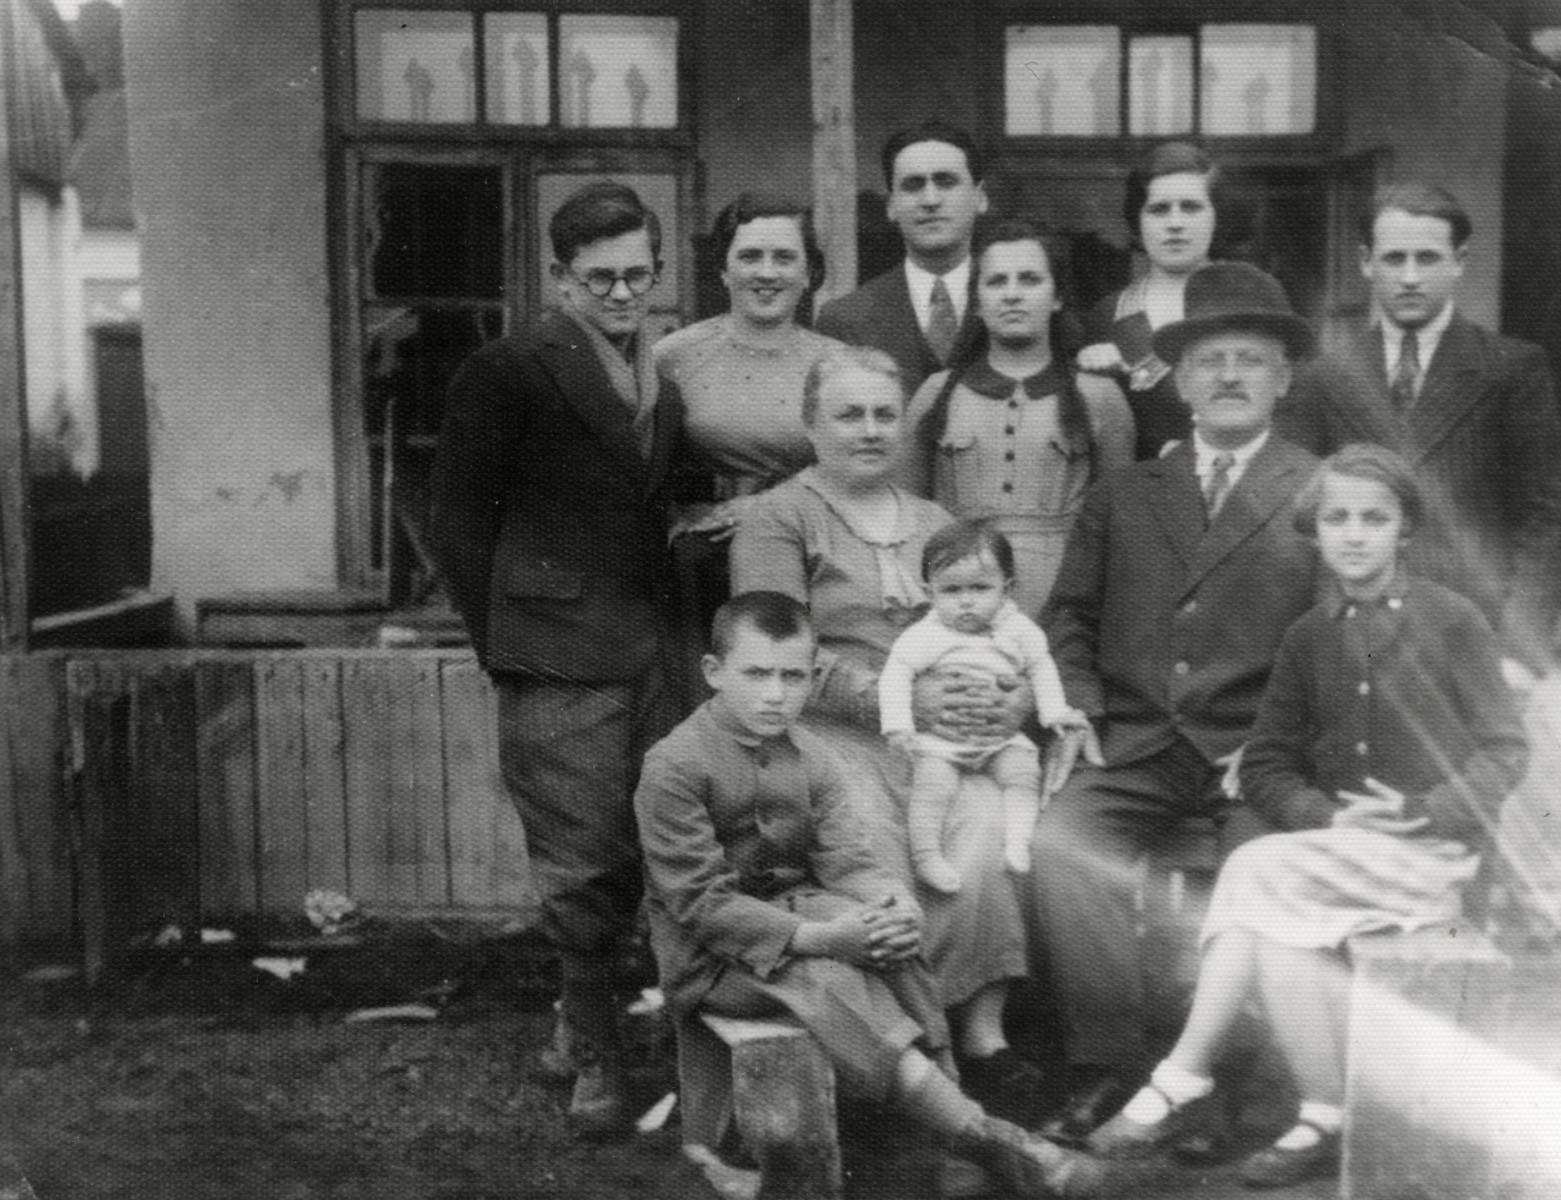 Prewar photograph Herskowicz family in front of their home.

Pictured are the grandparents Bezalel and Yehudit (nee Salomon) Herskowicz.  Yehudit is holding her grand daughter  Erica on her lap.  Seated on the far right is the youngest daughter Leah.  Standing in the center (with braids) is Tova.  Back row (left to right) are Zvi, Minna, Zvi Daniel and Rivka (nee Herskowicz) Daniel (the parents of Erica), and Ely Herskowicz.